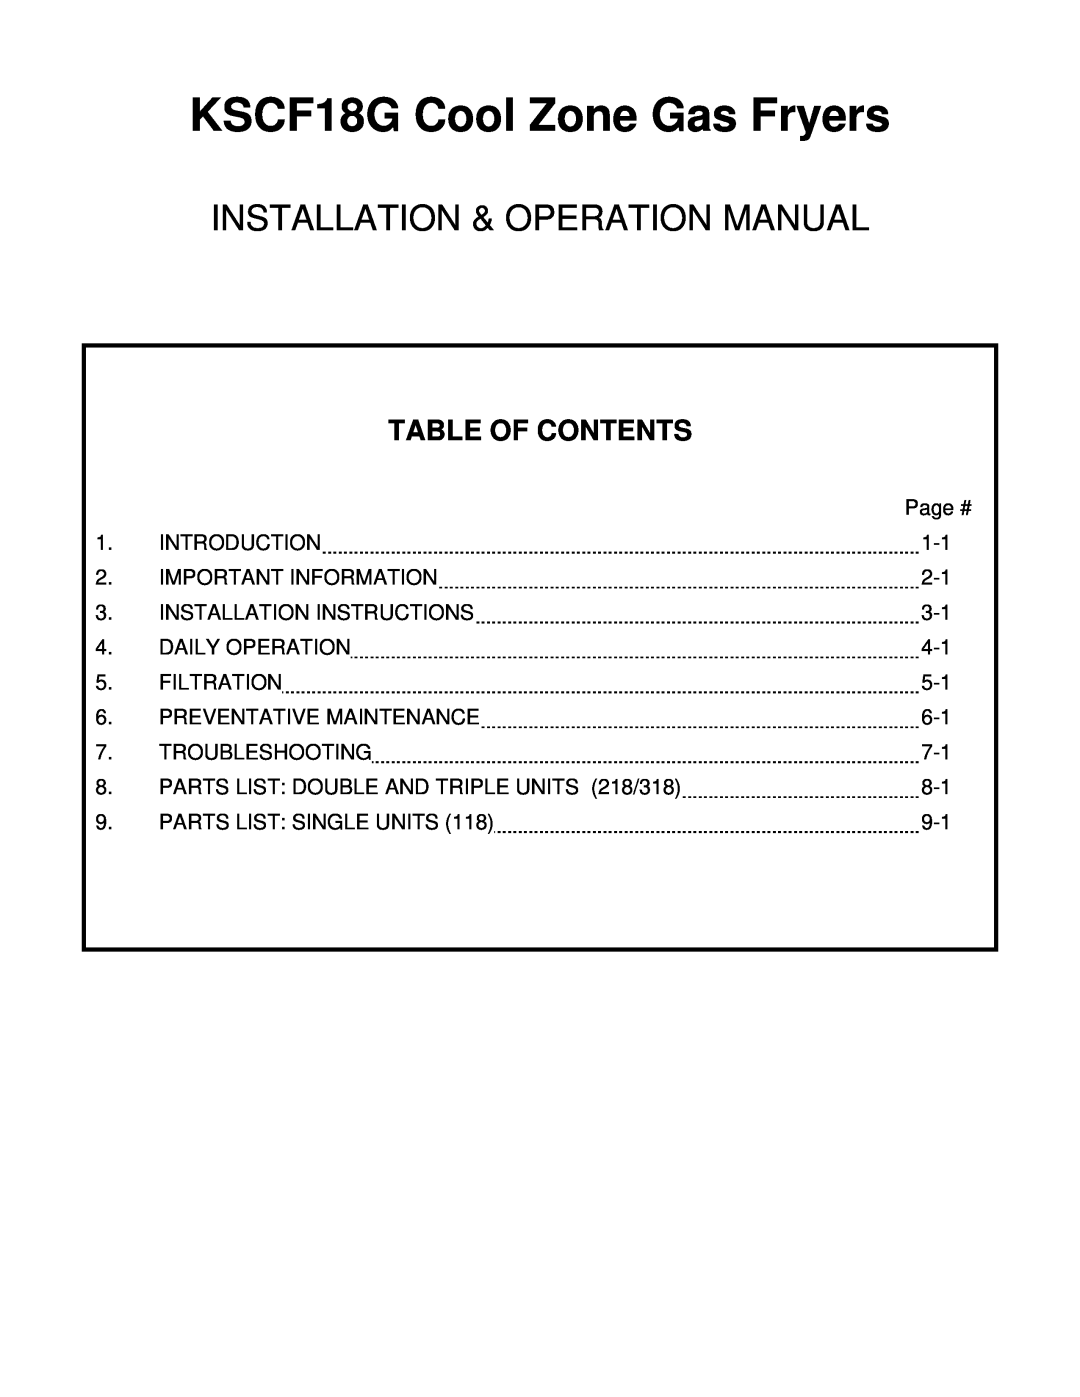 Frymaster manual Table Of Contents, KSCF18G Cool Zone Gas Fryers, Installation & Operation Manual 